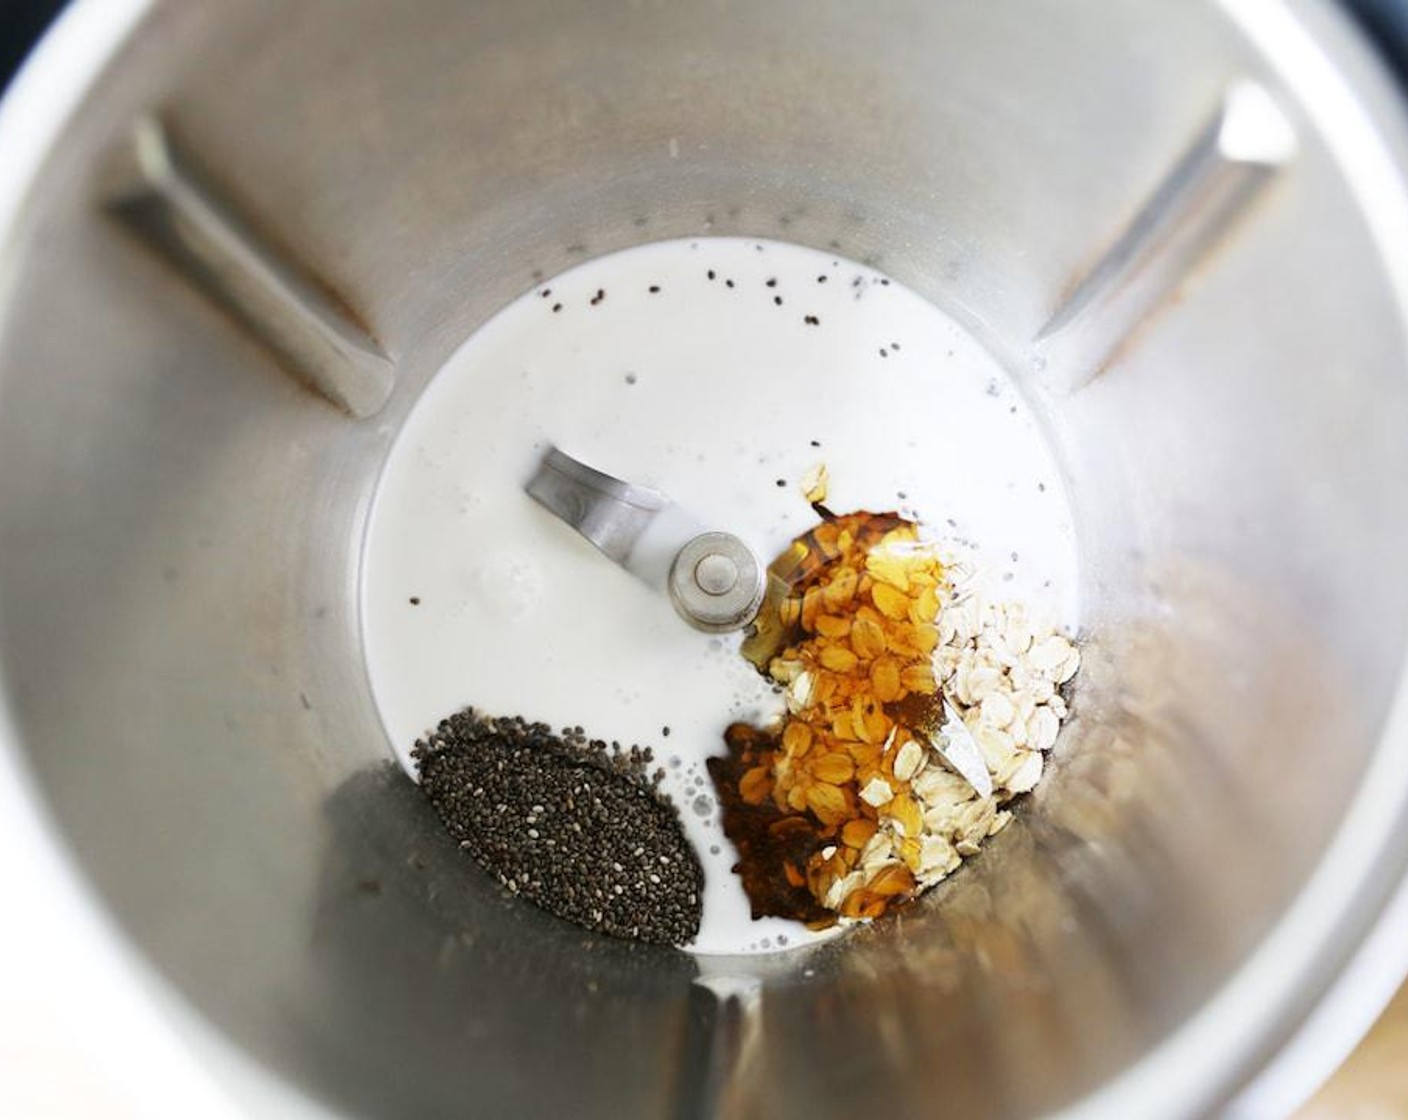 step 1 Blend the Chia Seeds (1/4 cup), Oats (2/3 cup), Coconut Milk (8 oz) and Honey (2 Tbsp) on Speed 2 for 1 minute. Transfer to a dish, cover and put in the fridge overnight.